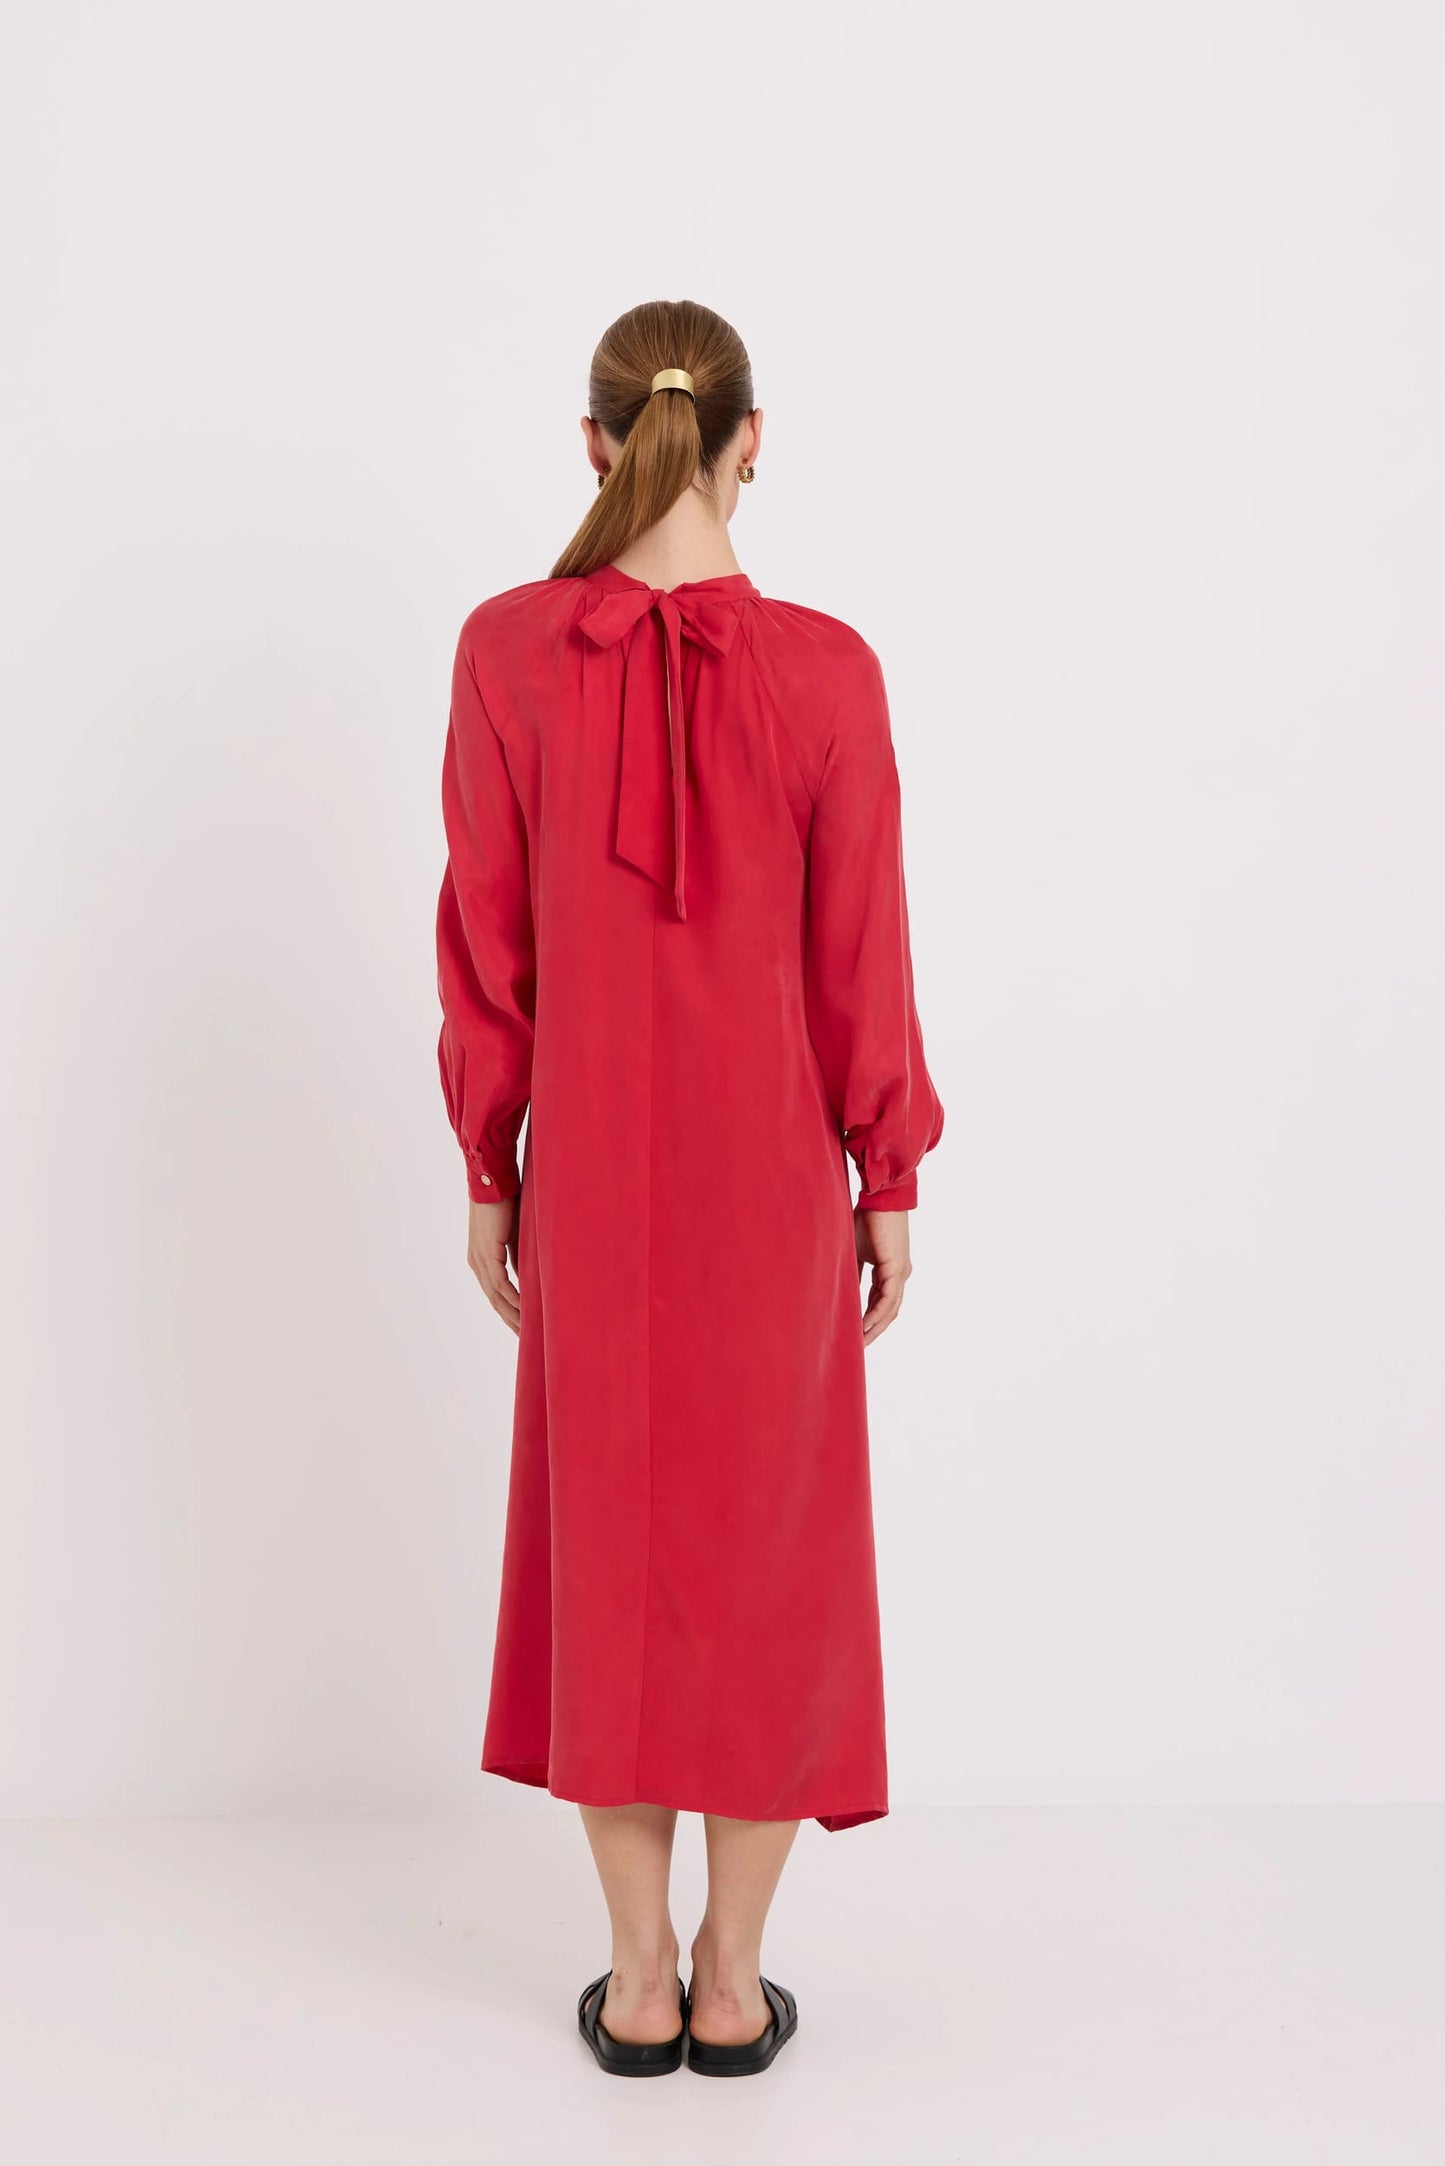 TUESDAY Elsie Dress Red